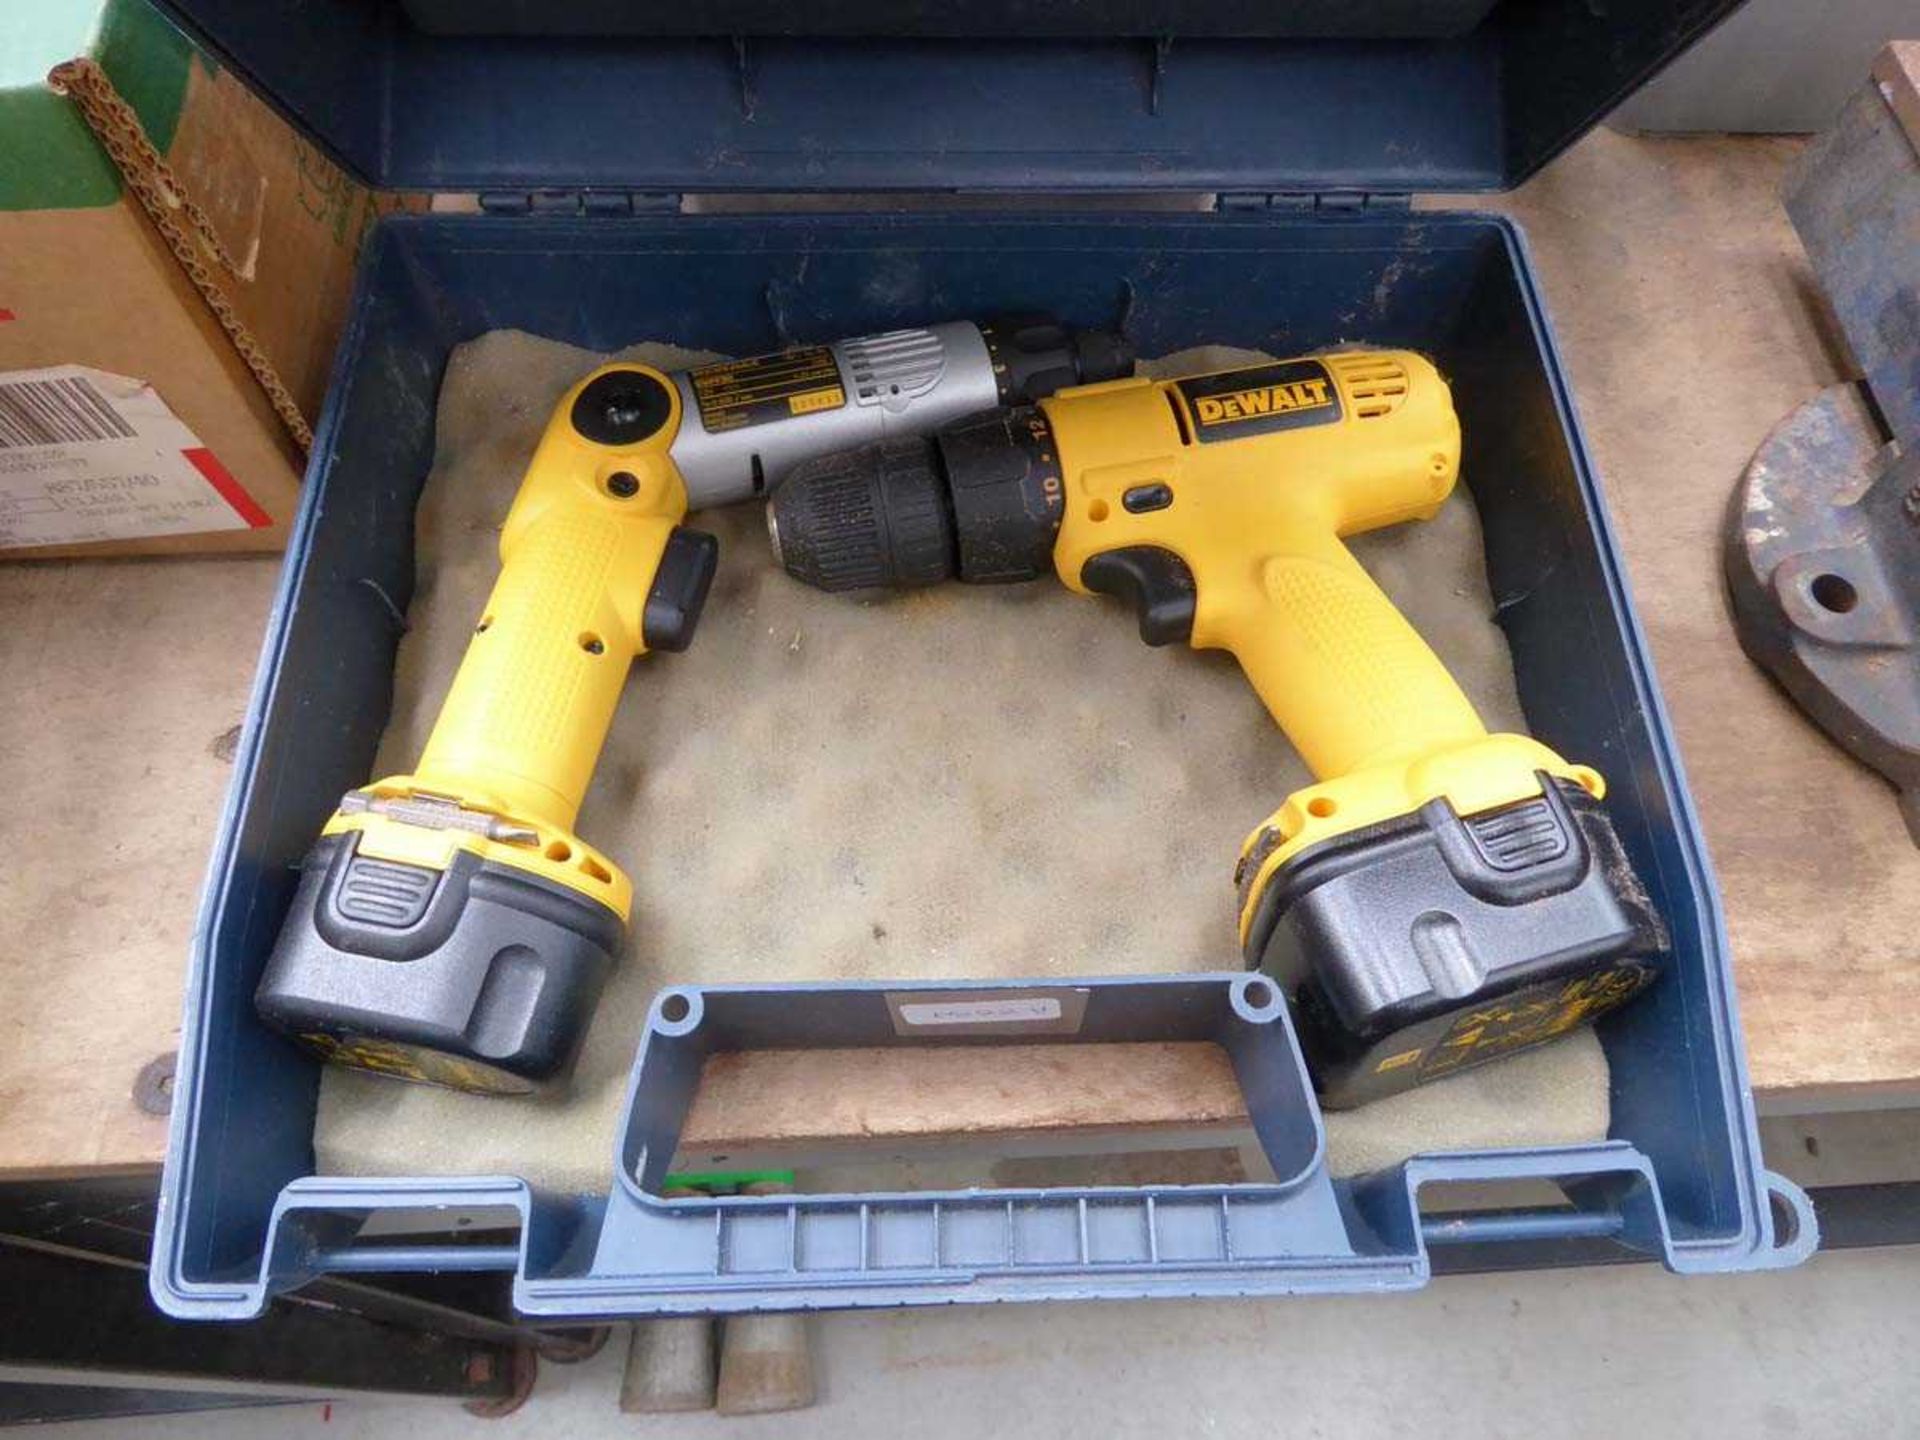 DeWalt battery drill and DeWalt angle drill, 2 batteries, no charger